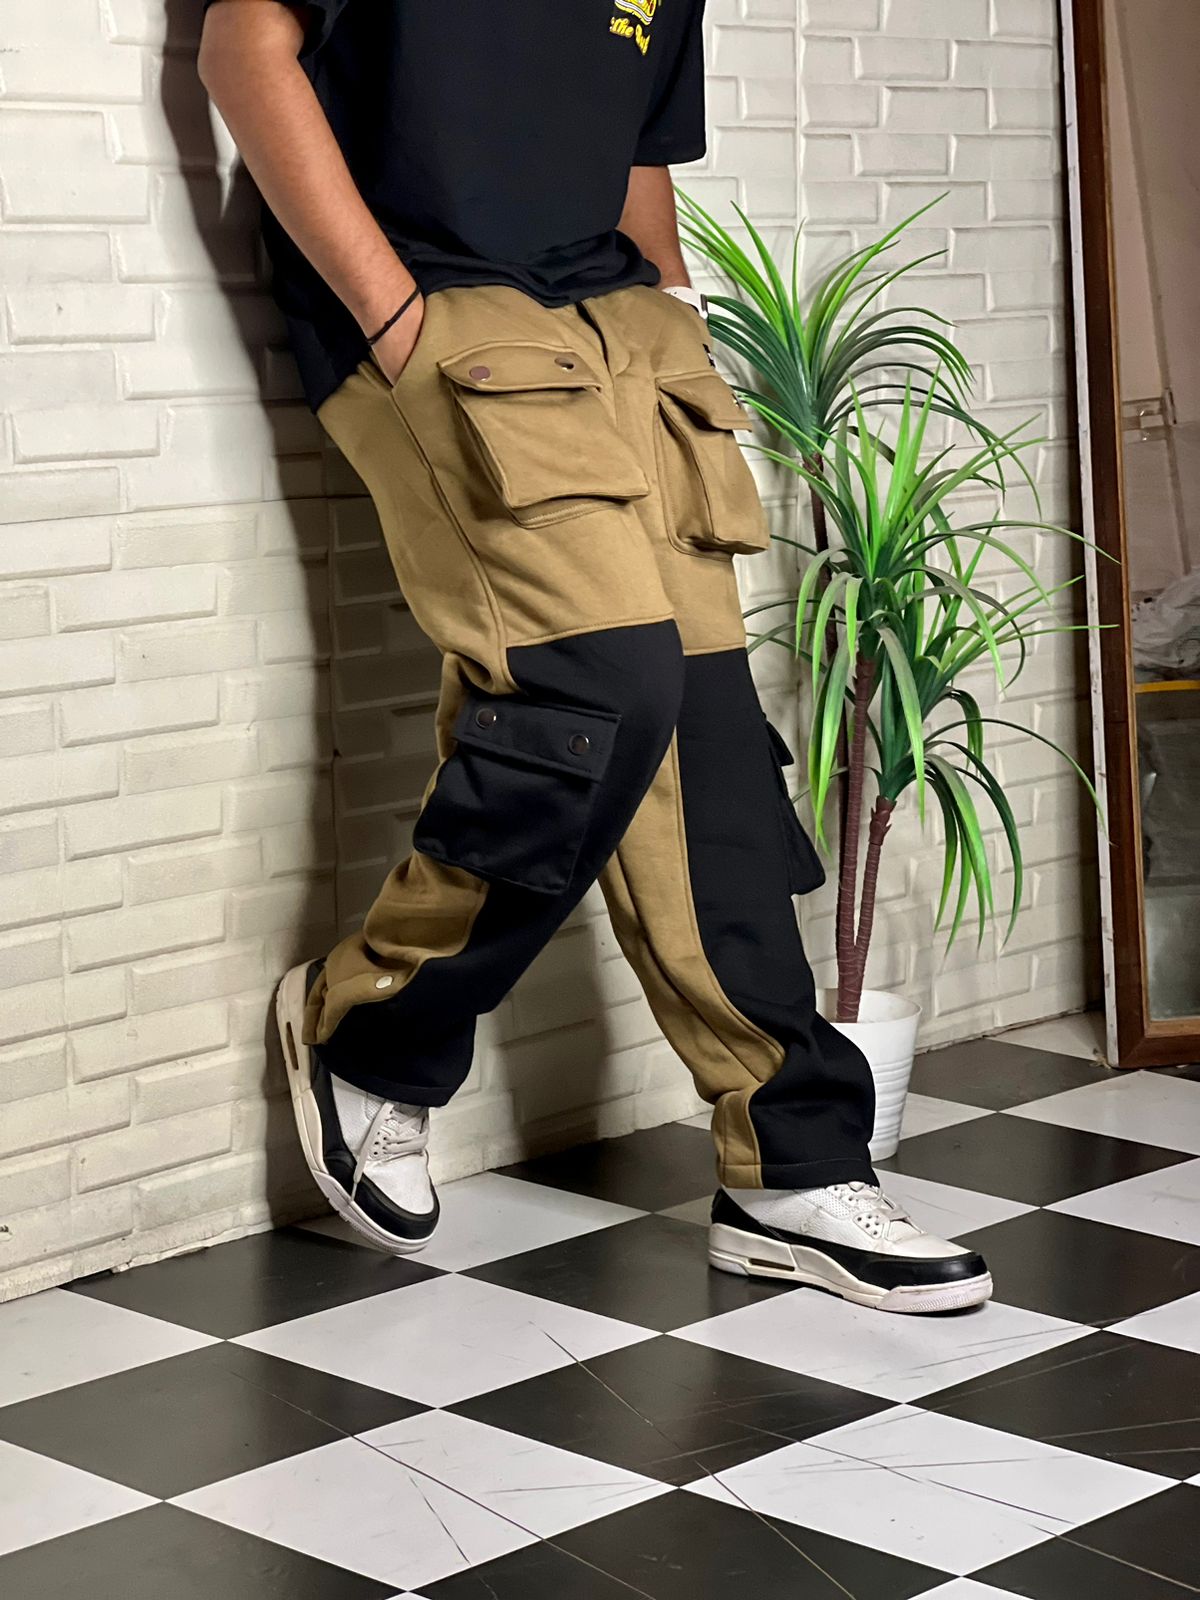 Military Issue Bdu Pants Online - tundraecology.hi.is 1694470617